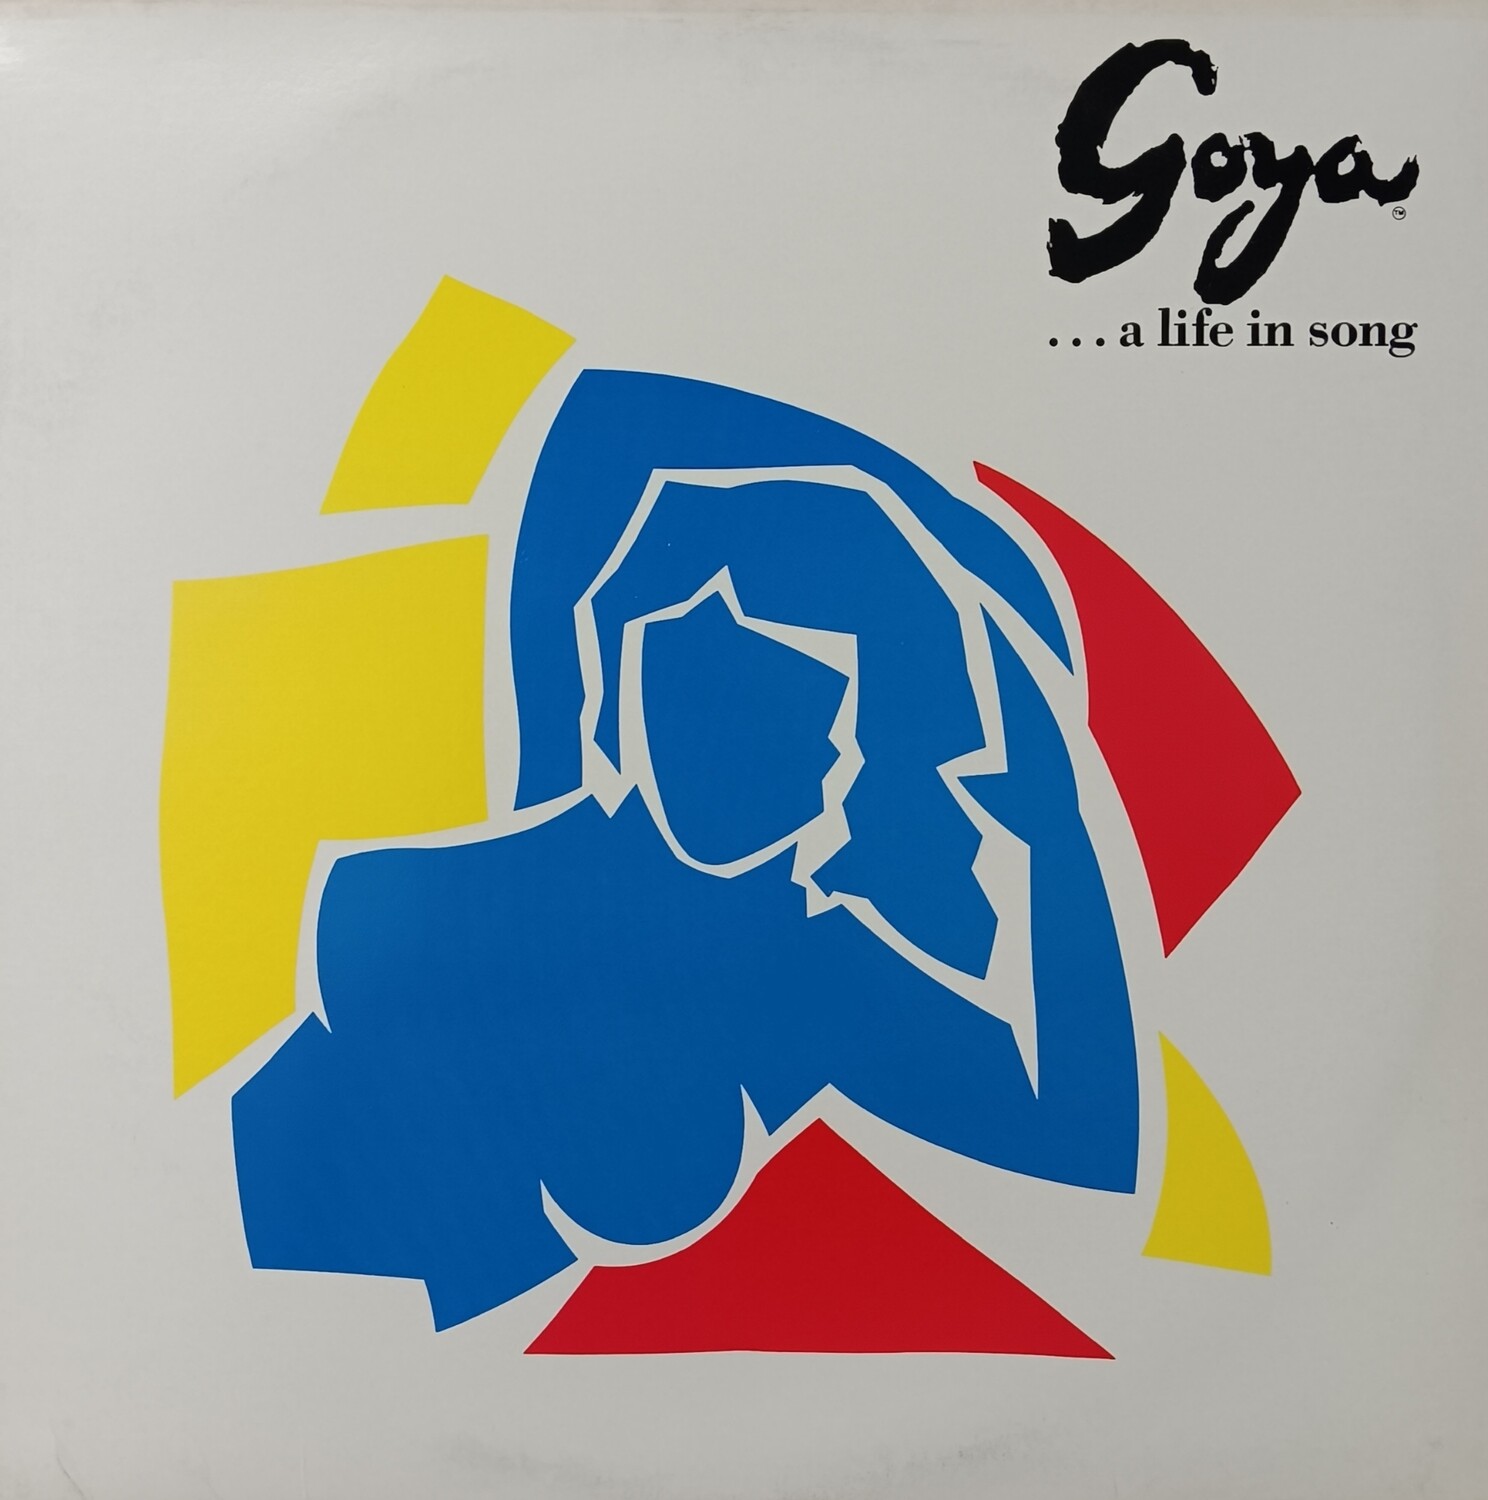 VARIOUS - Goya A life in song